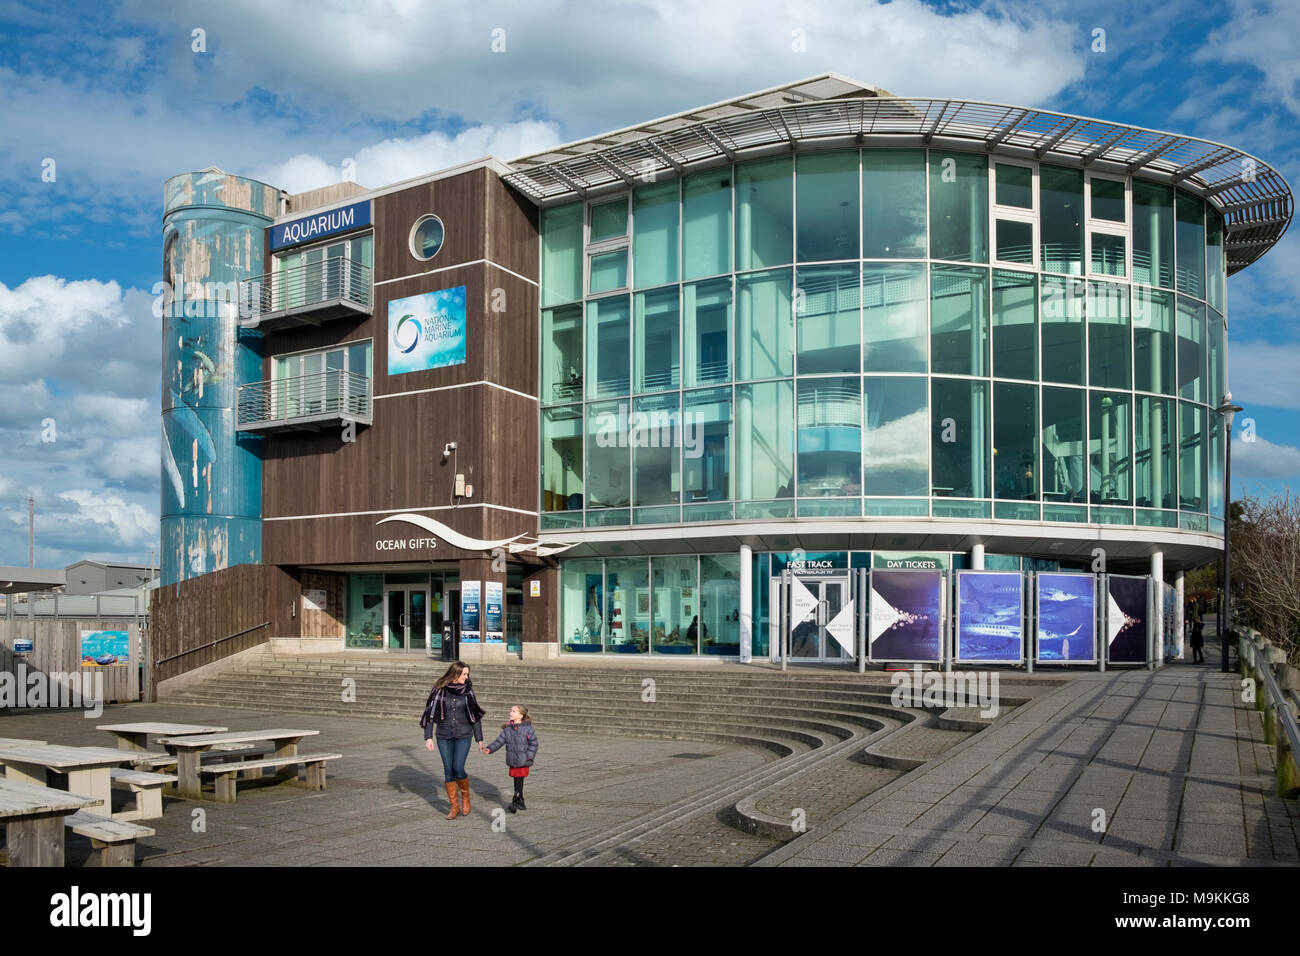 A mother and child walking away from the National Marine Aquarium in Plymouth, Devon, UK on a bright, sunny day. Stock Photo